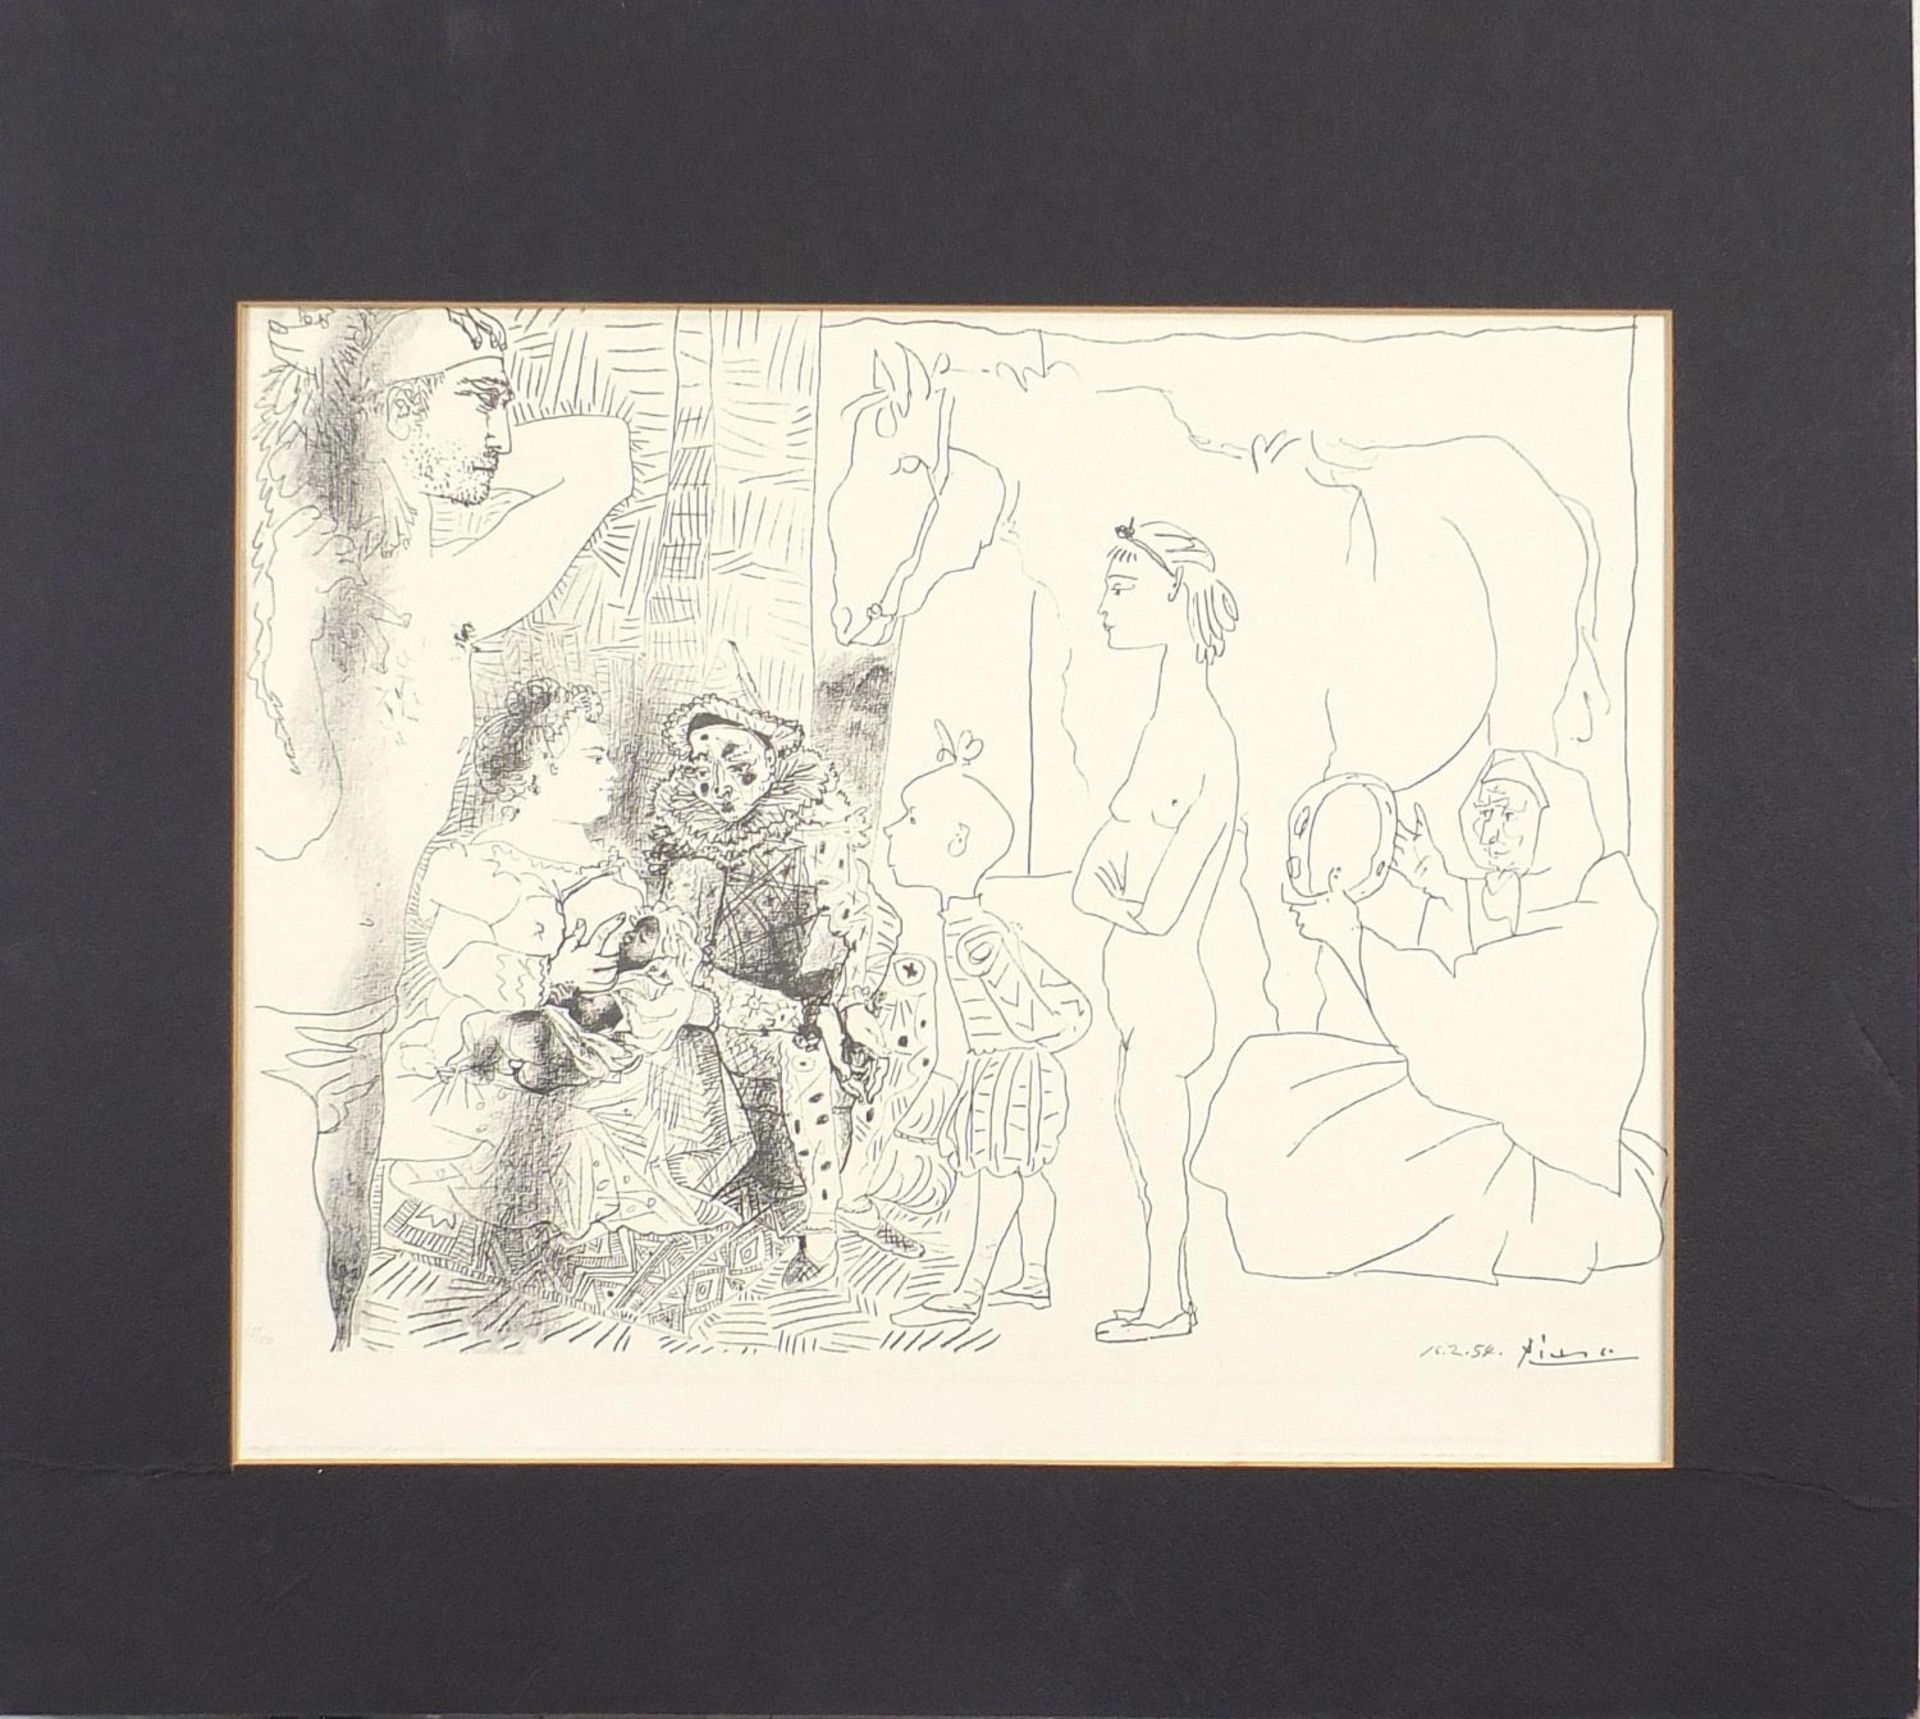 Pablo Picasso - Saltimbanques family, (La Famille Du Saltimbanque) vintage lithograph, American - Image 2 of 6